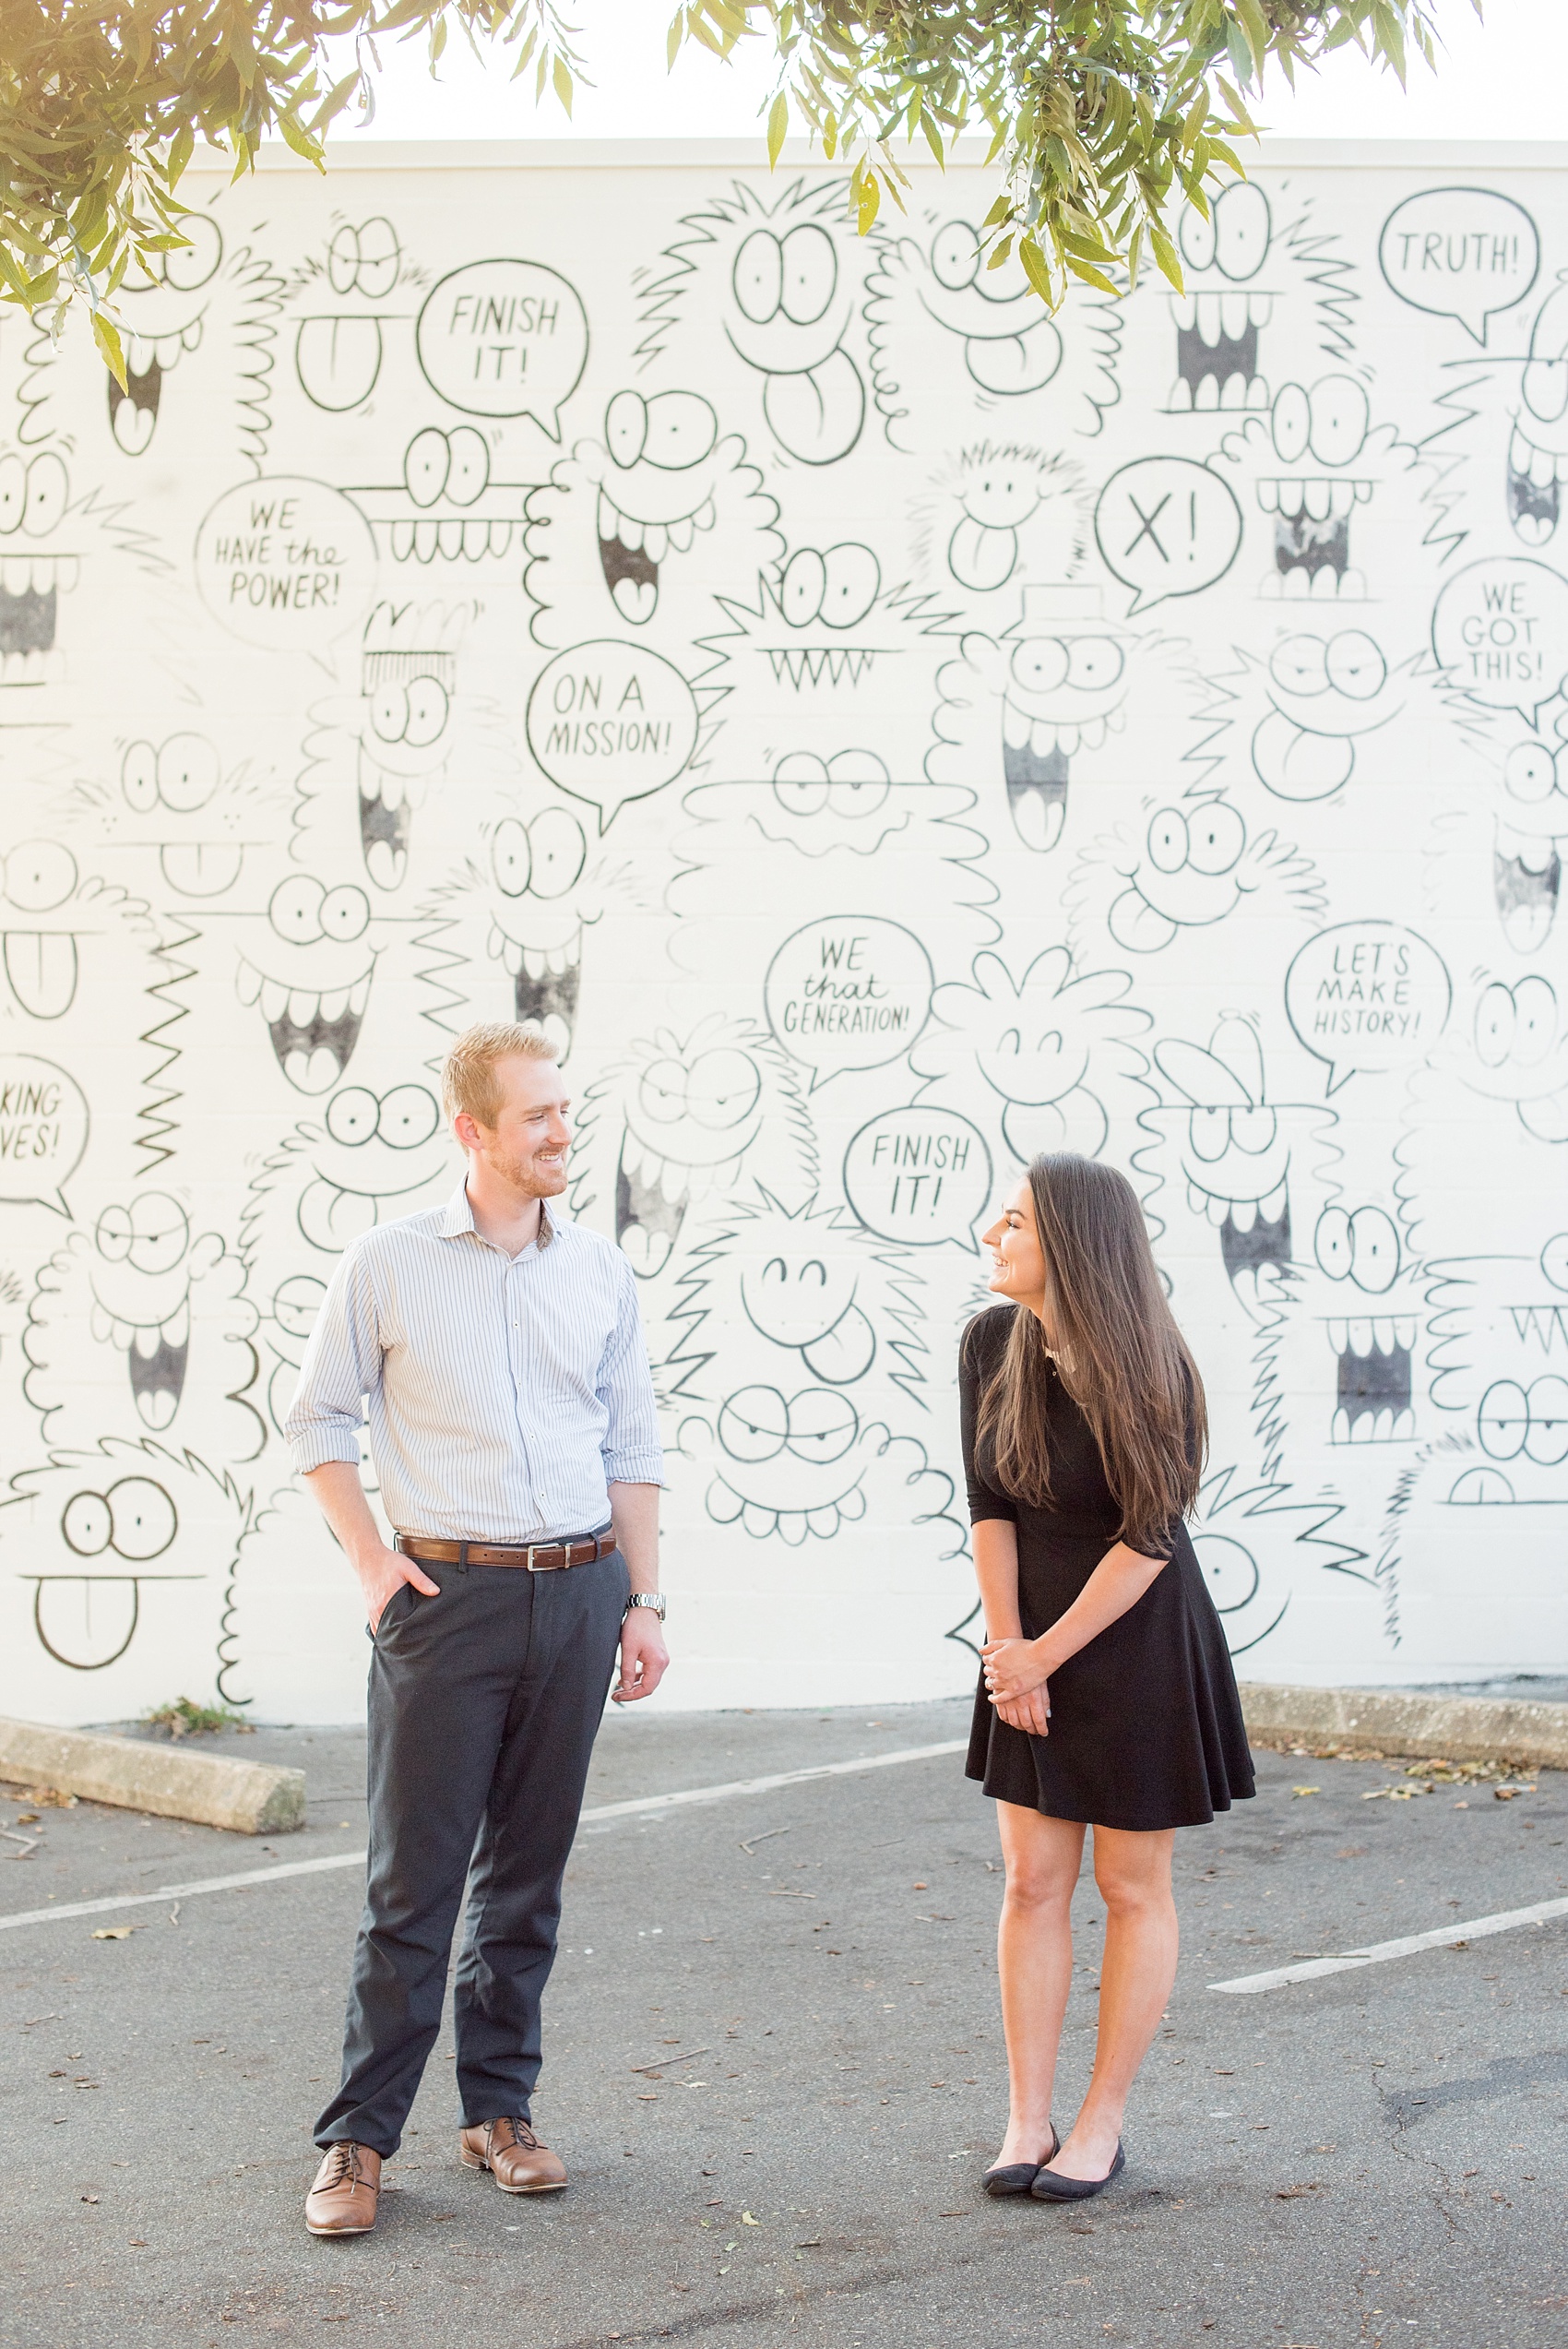 Mikkel Paige Photography photos of a downtown Raleigh engagement session with comical, fun murals.